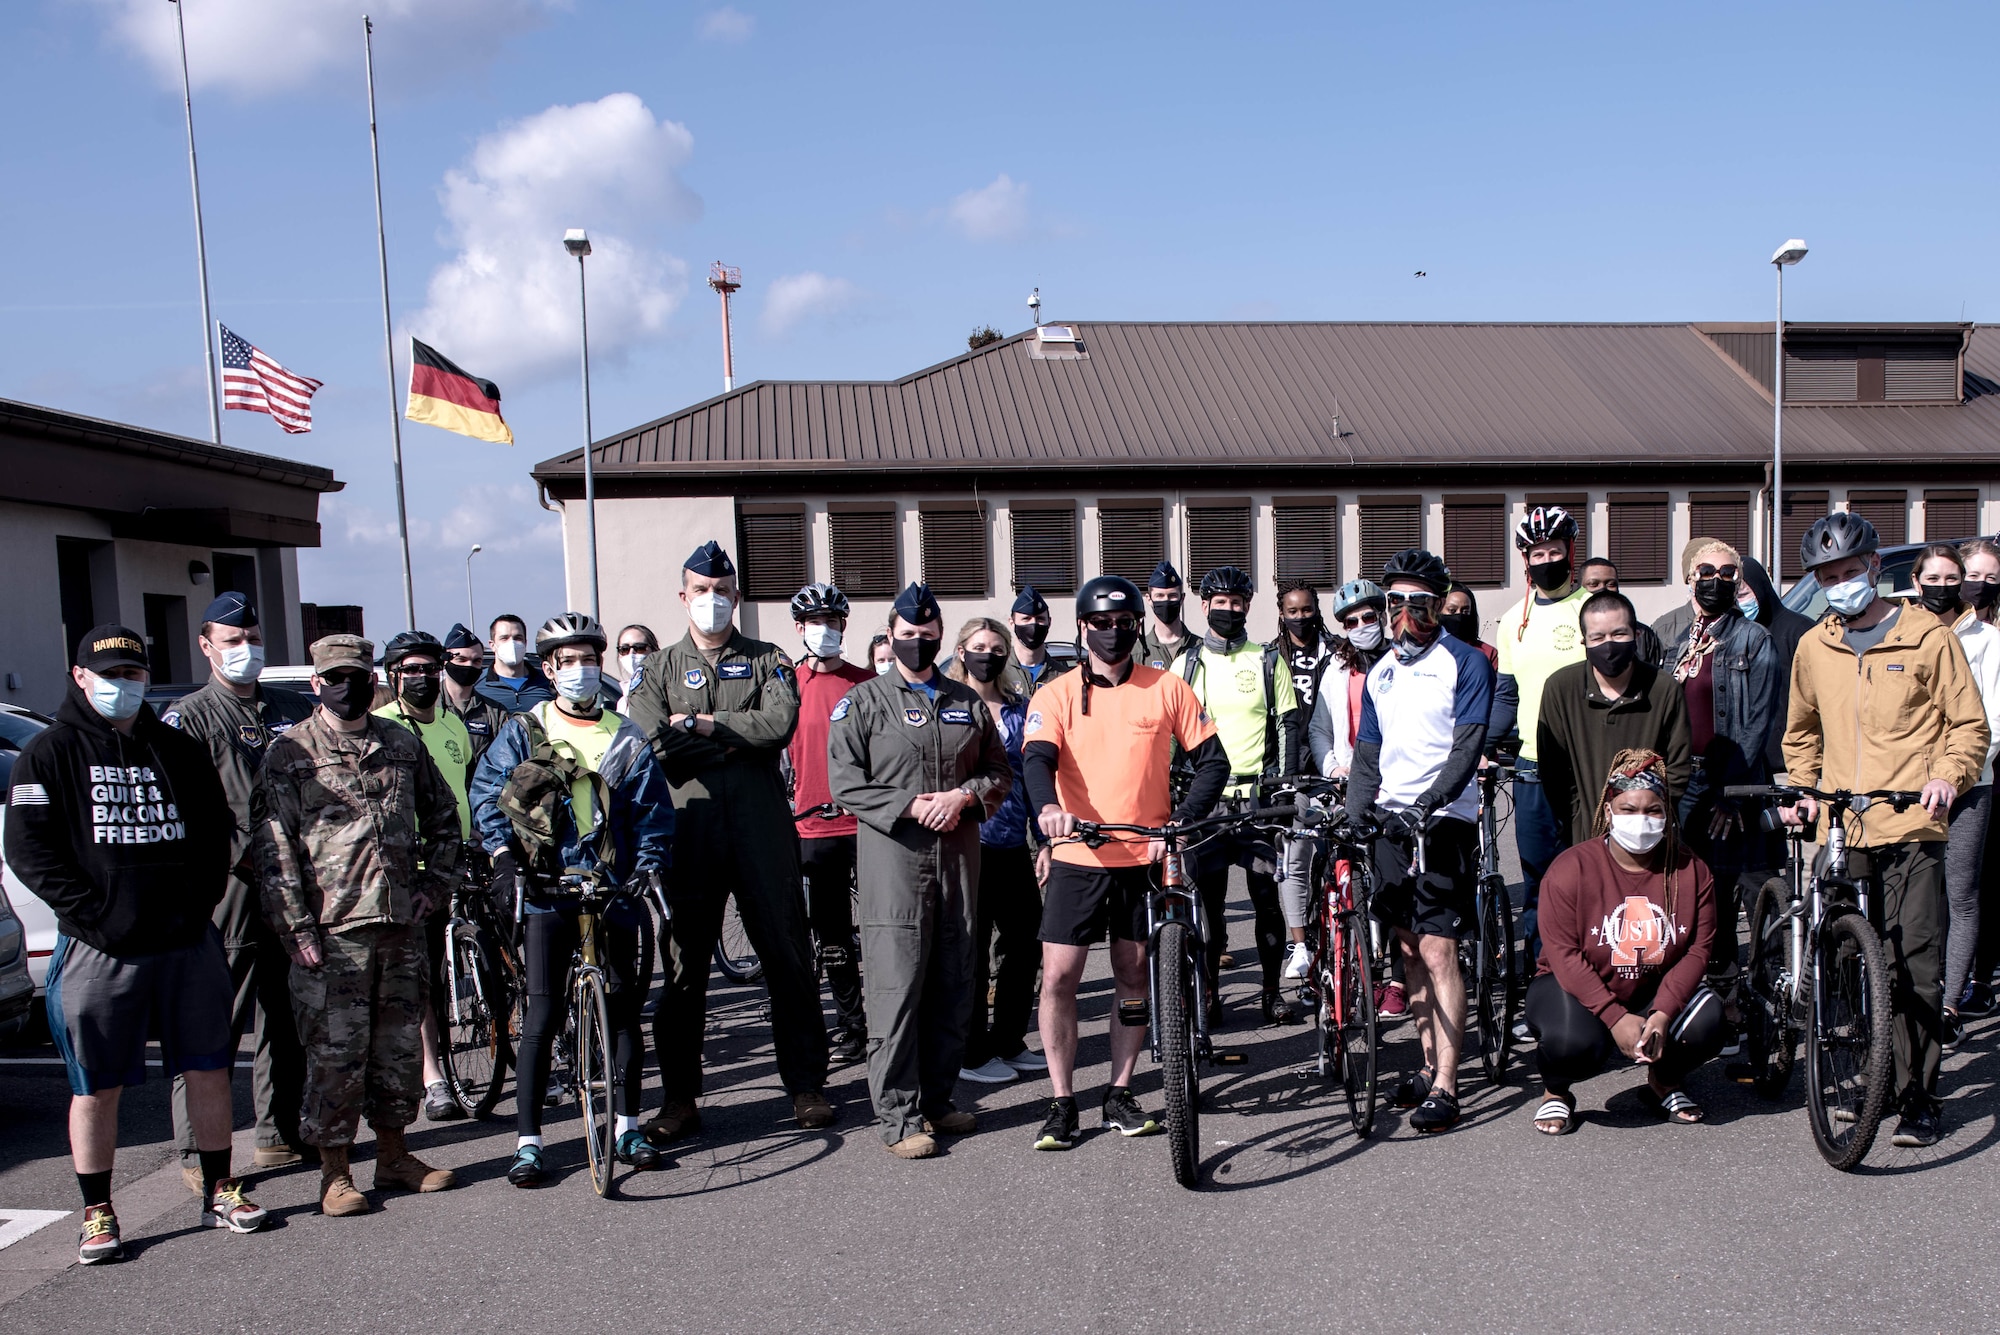 People stand for a group photo, several of them have bicycles.